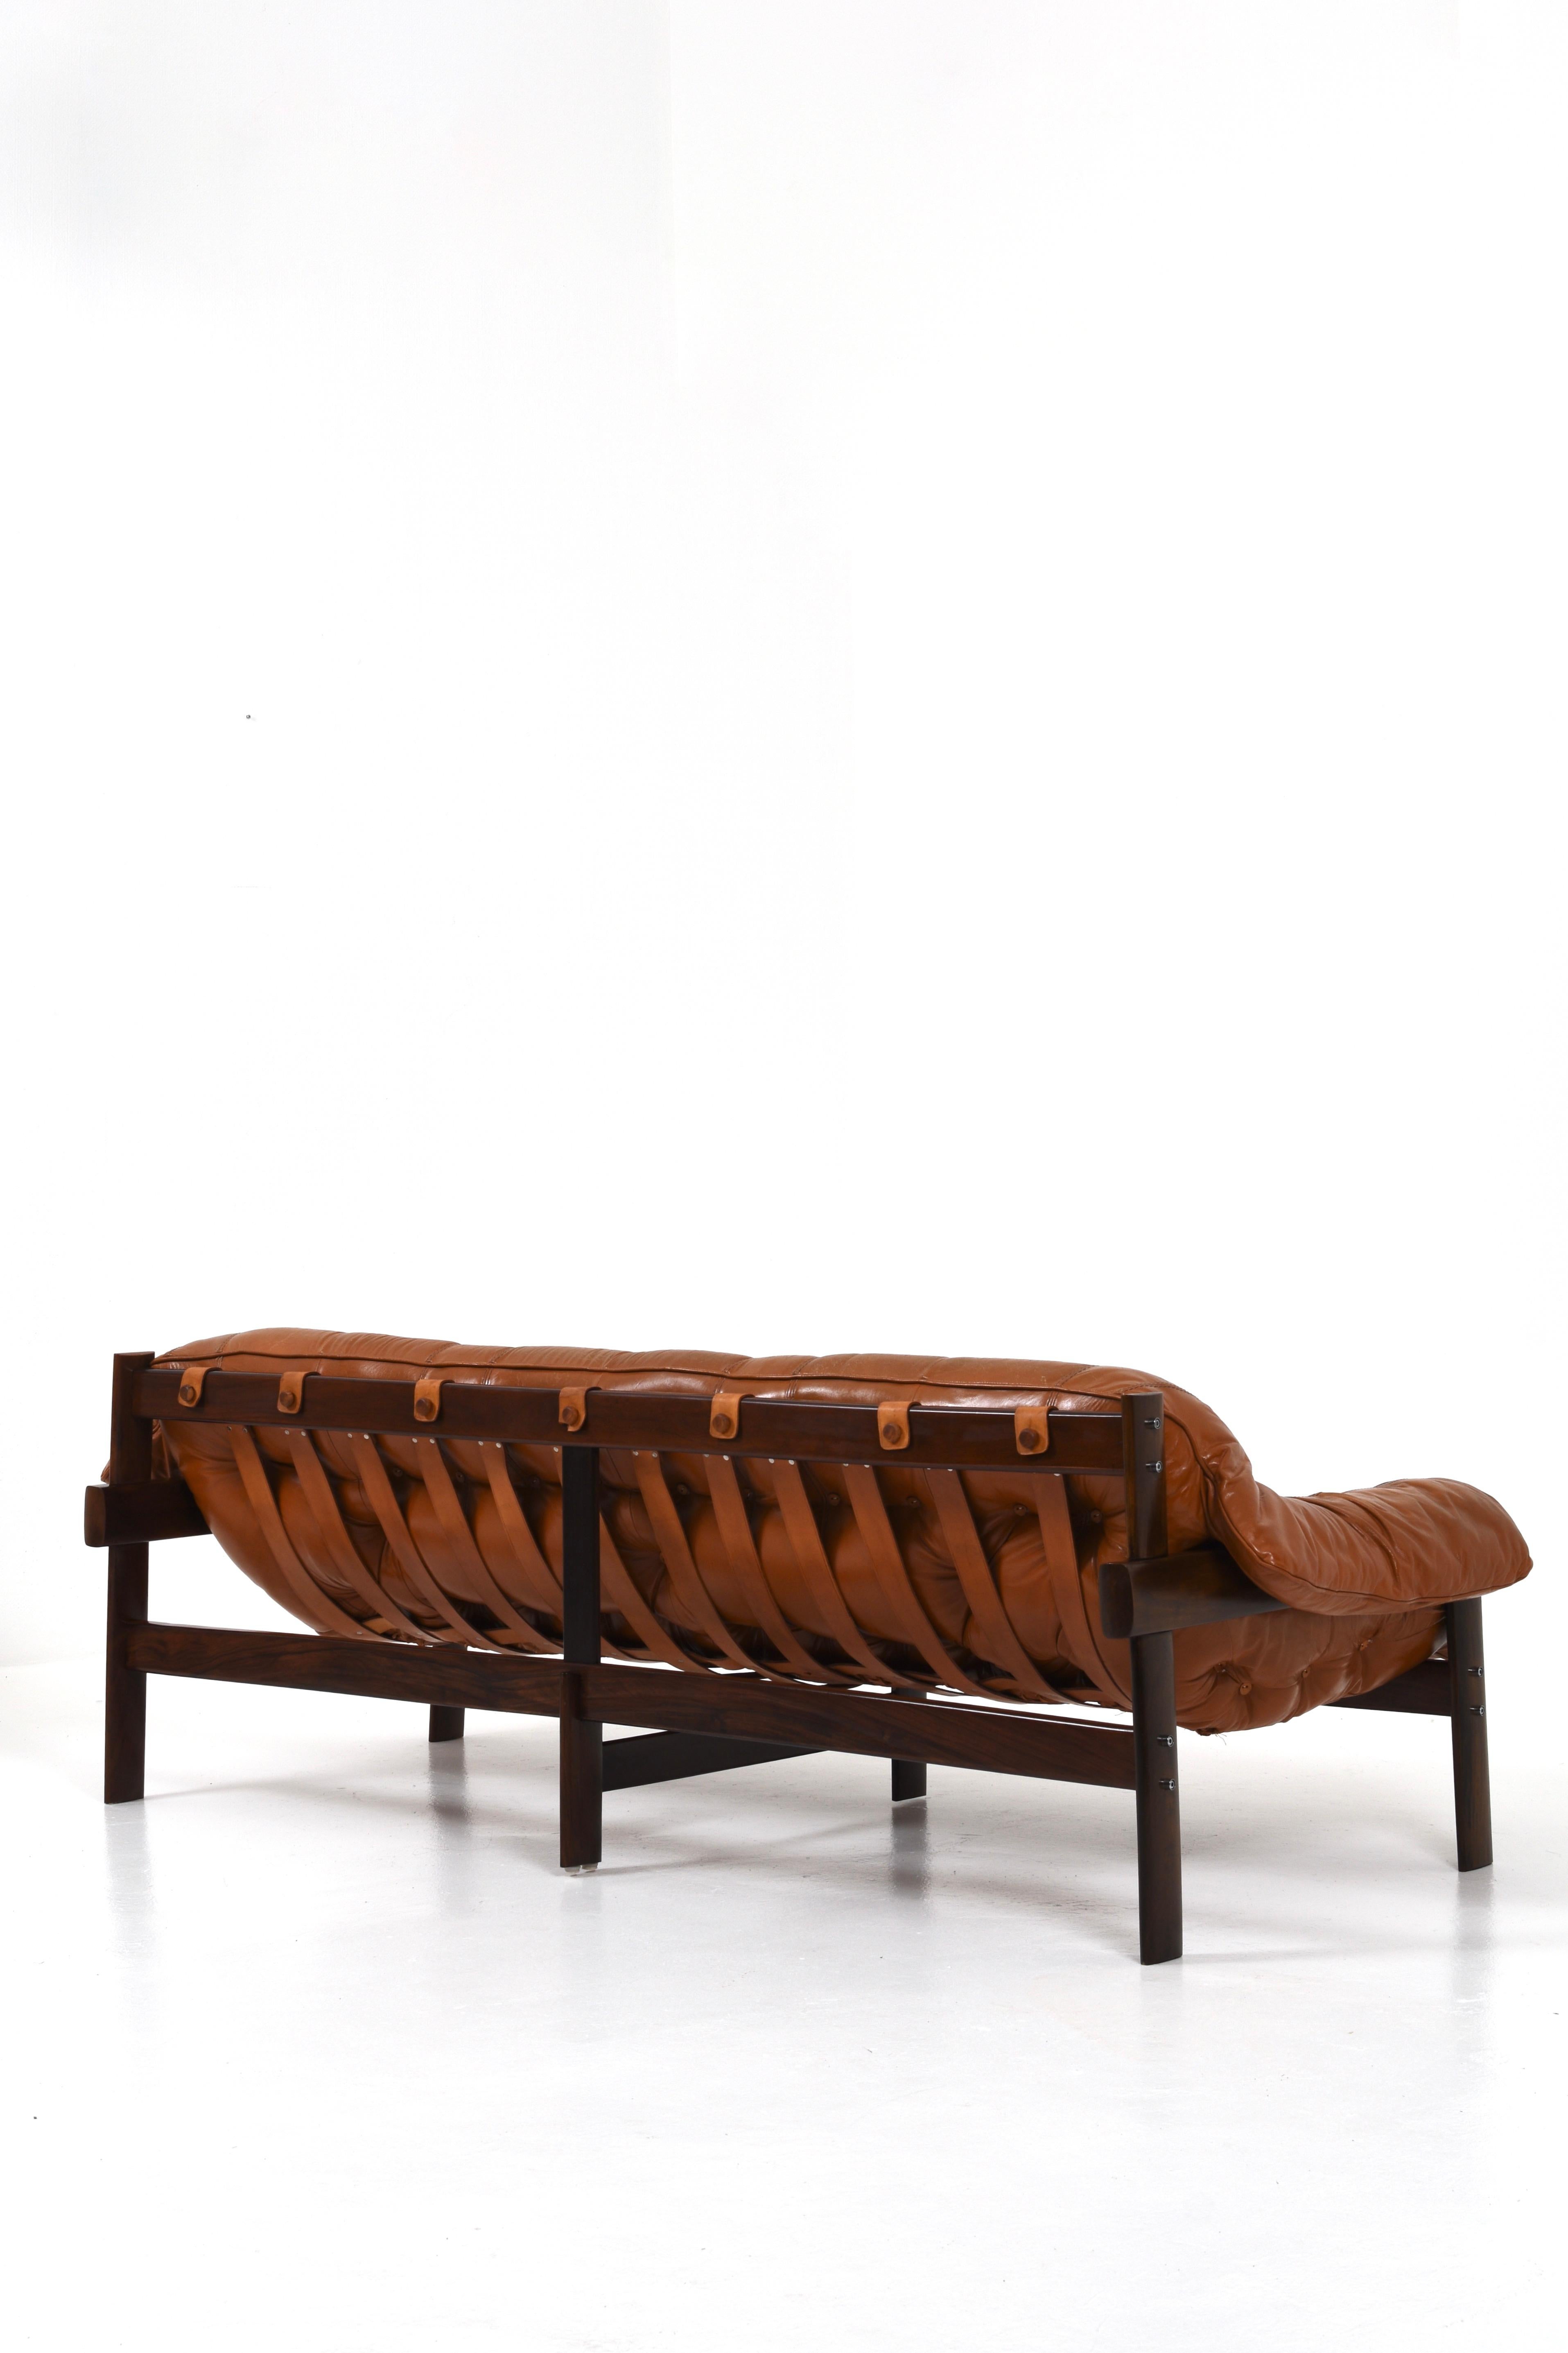 Fantastic MP-41 three-seater sofa in original cognac leather and dark solid wood frame. Designed by Percival Lafer for MP Lafer in the 70s.

The sofa has its original mark in the leather strap on the back, as shown in the picture. This very